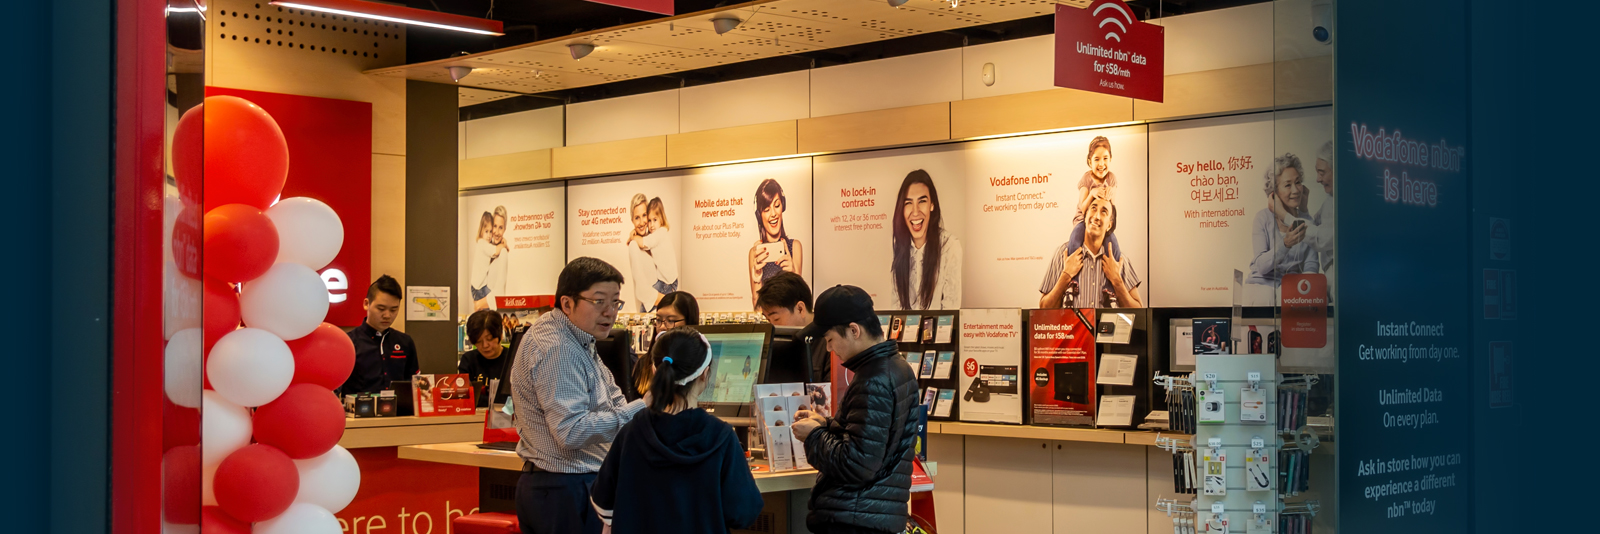 A busy wireless store with employees and customers.